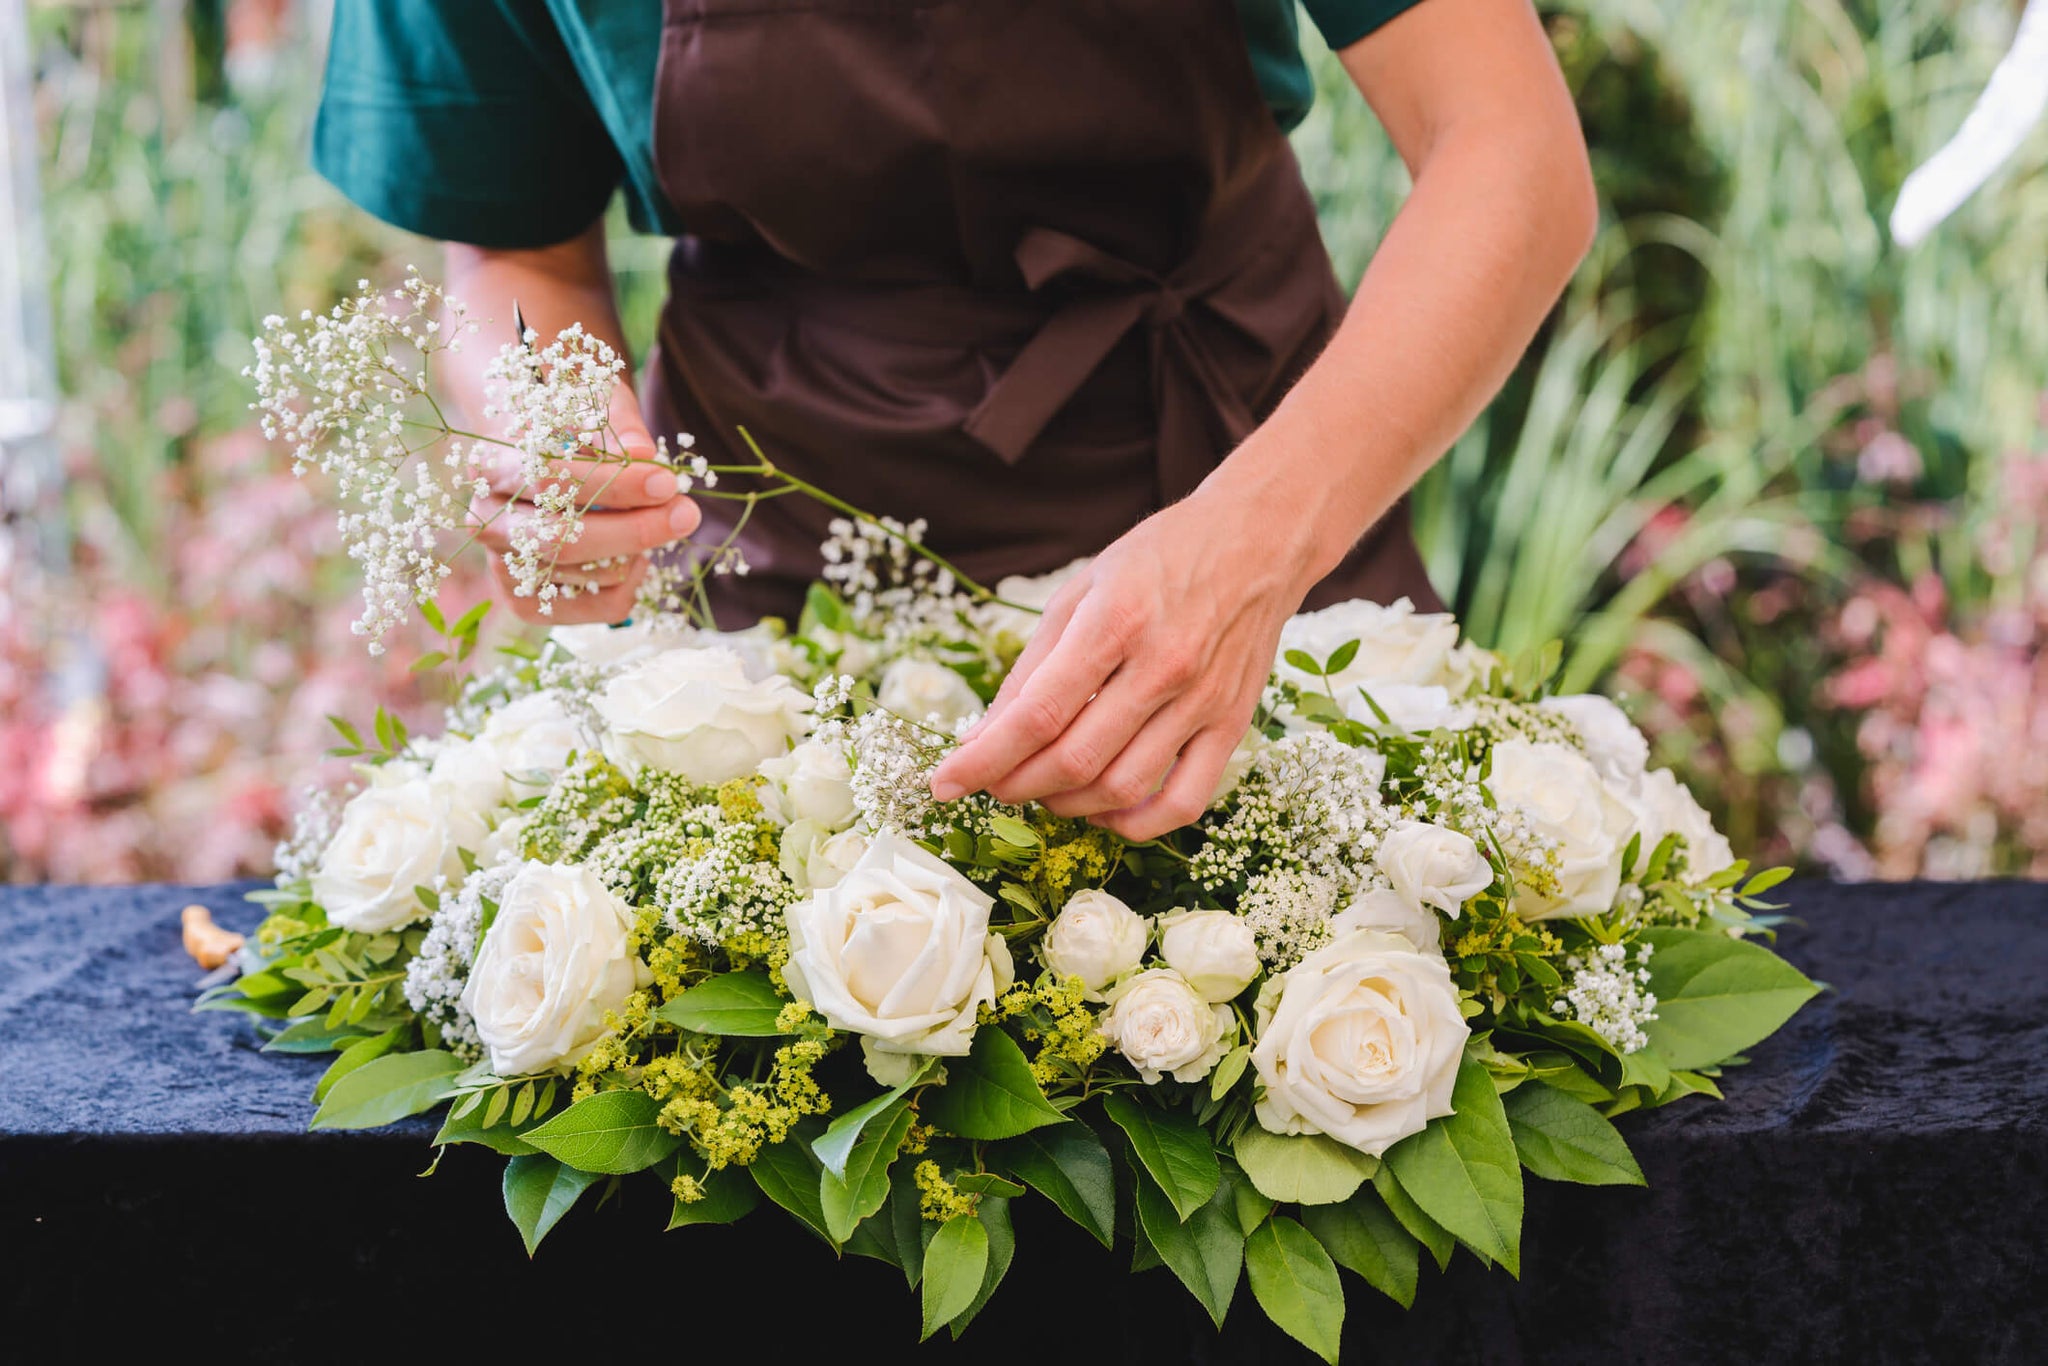 A person arranging a bridal bouquet holding a baby's breath.